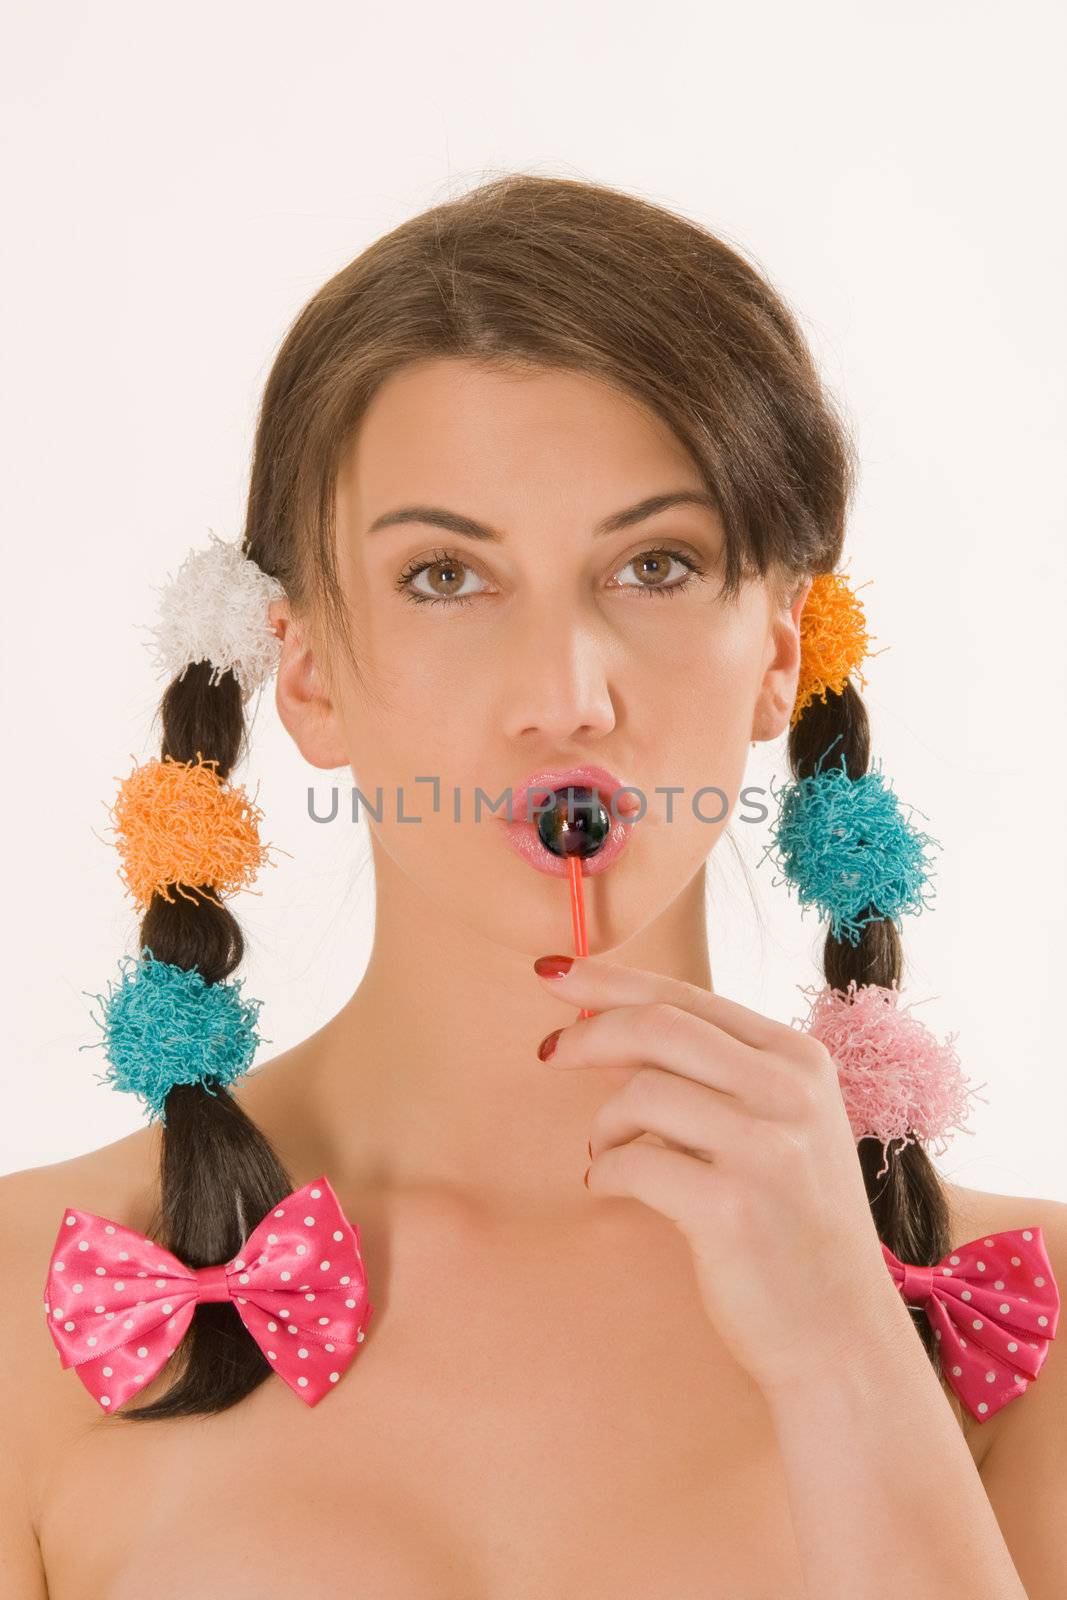 Girl with braids and colorful lollipops by STphotography